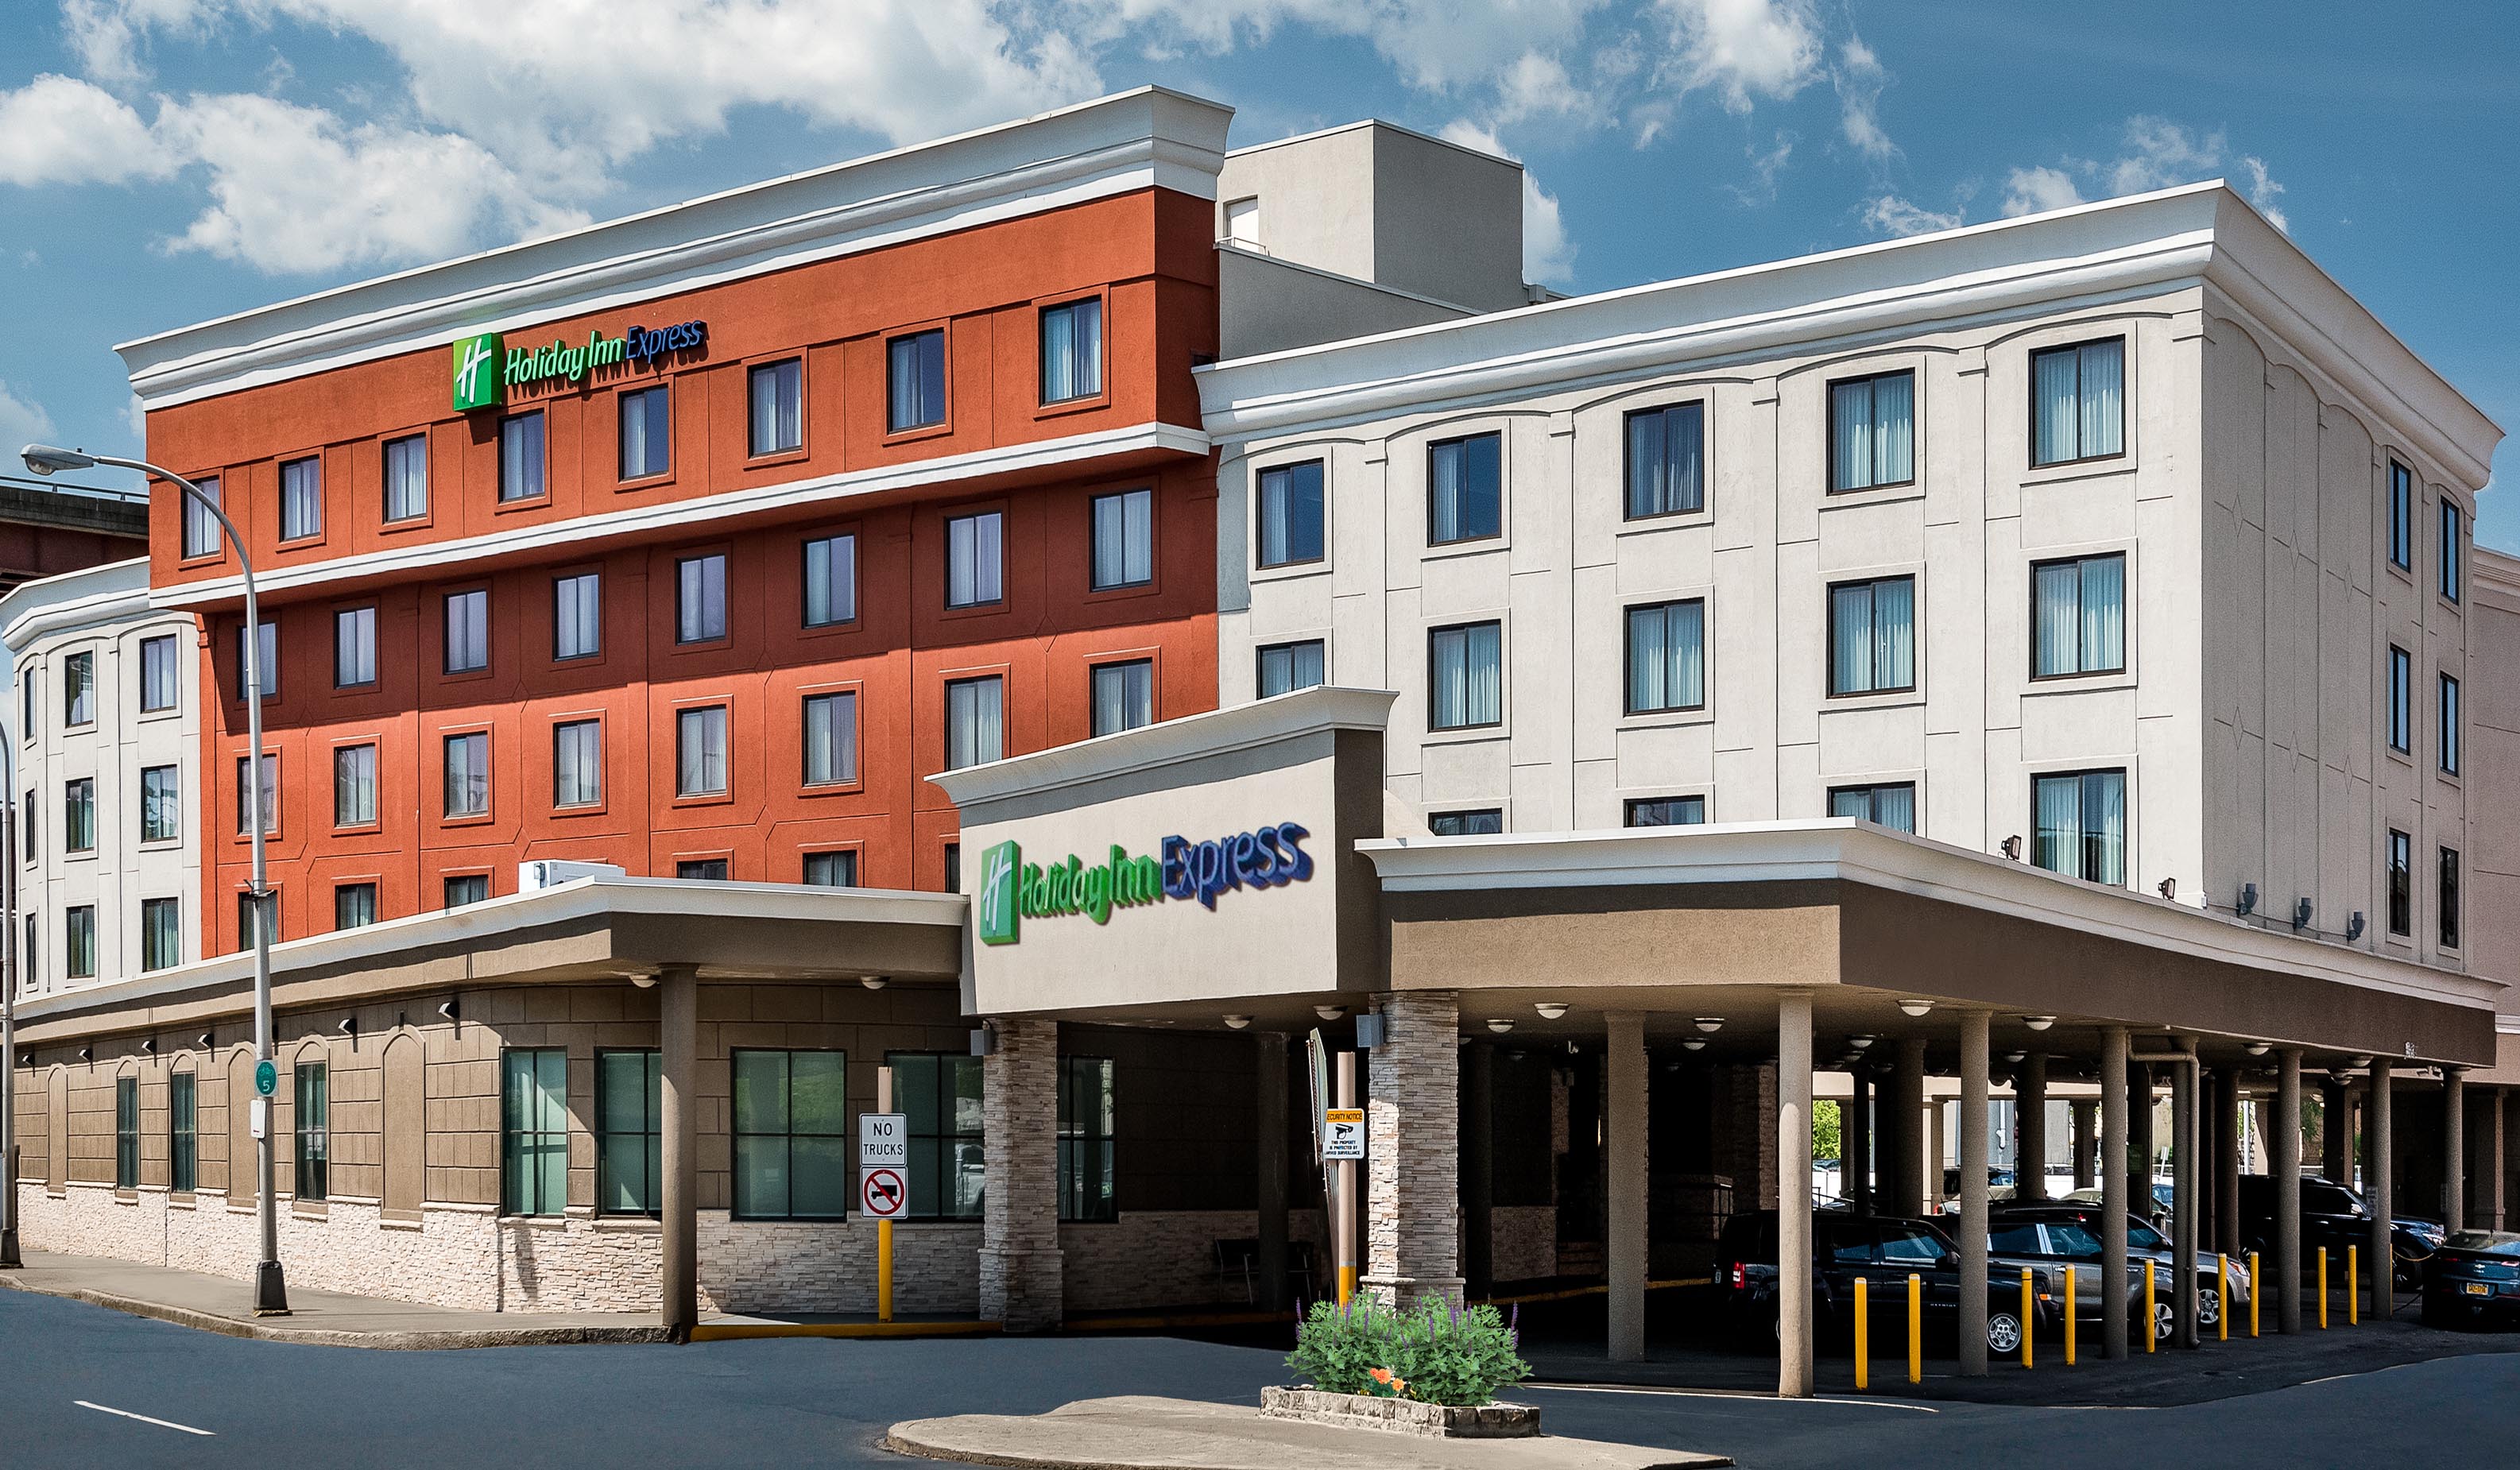 Holiday Inn Express (The Oiring Group)